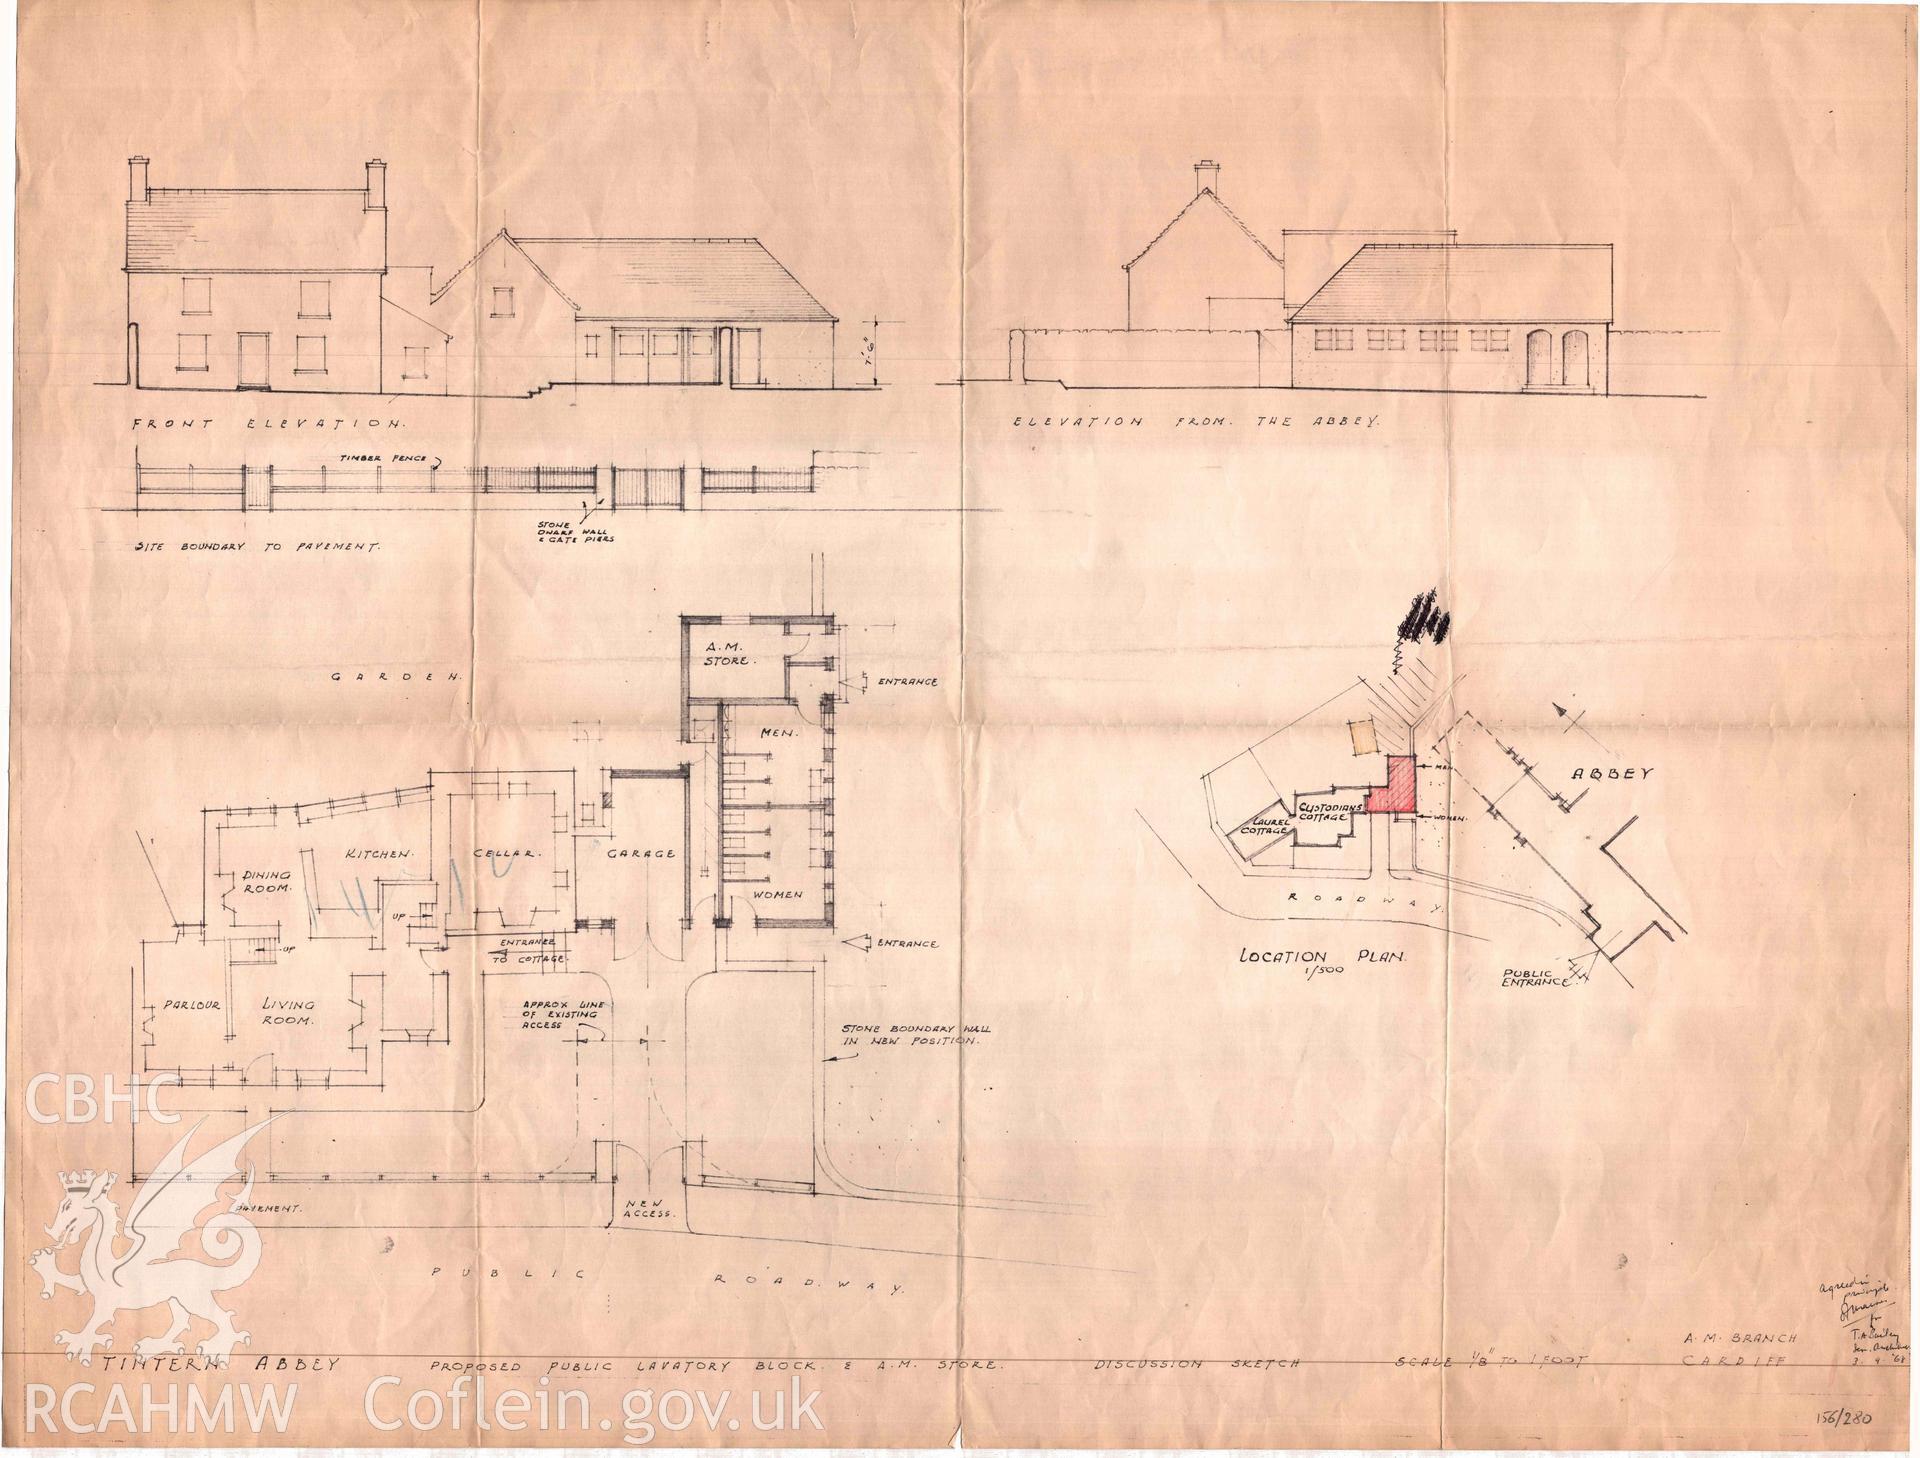 Cadw guardianship monument drawing, location plan, elevations and ground plan of proposed public lavatory block and A.M. store, Tintern Abbey, dated September 1968.